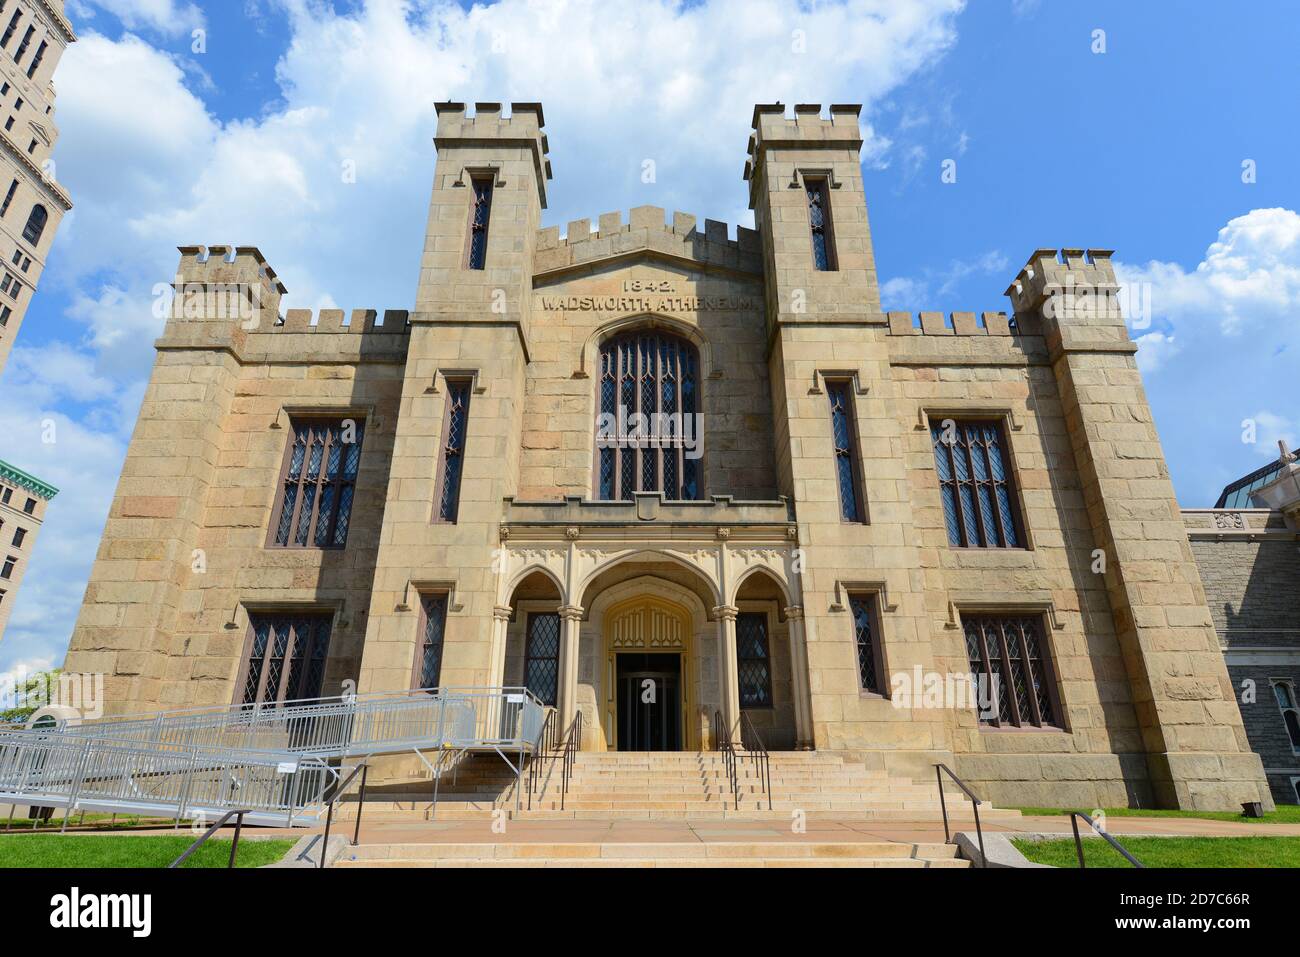 Historic Wadsworth Atheneum Museum of Art in downtown Hartford, Connecticut, USA. Stock Photo